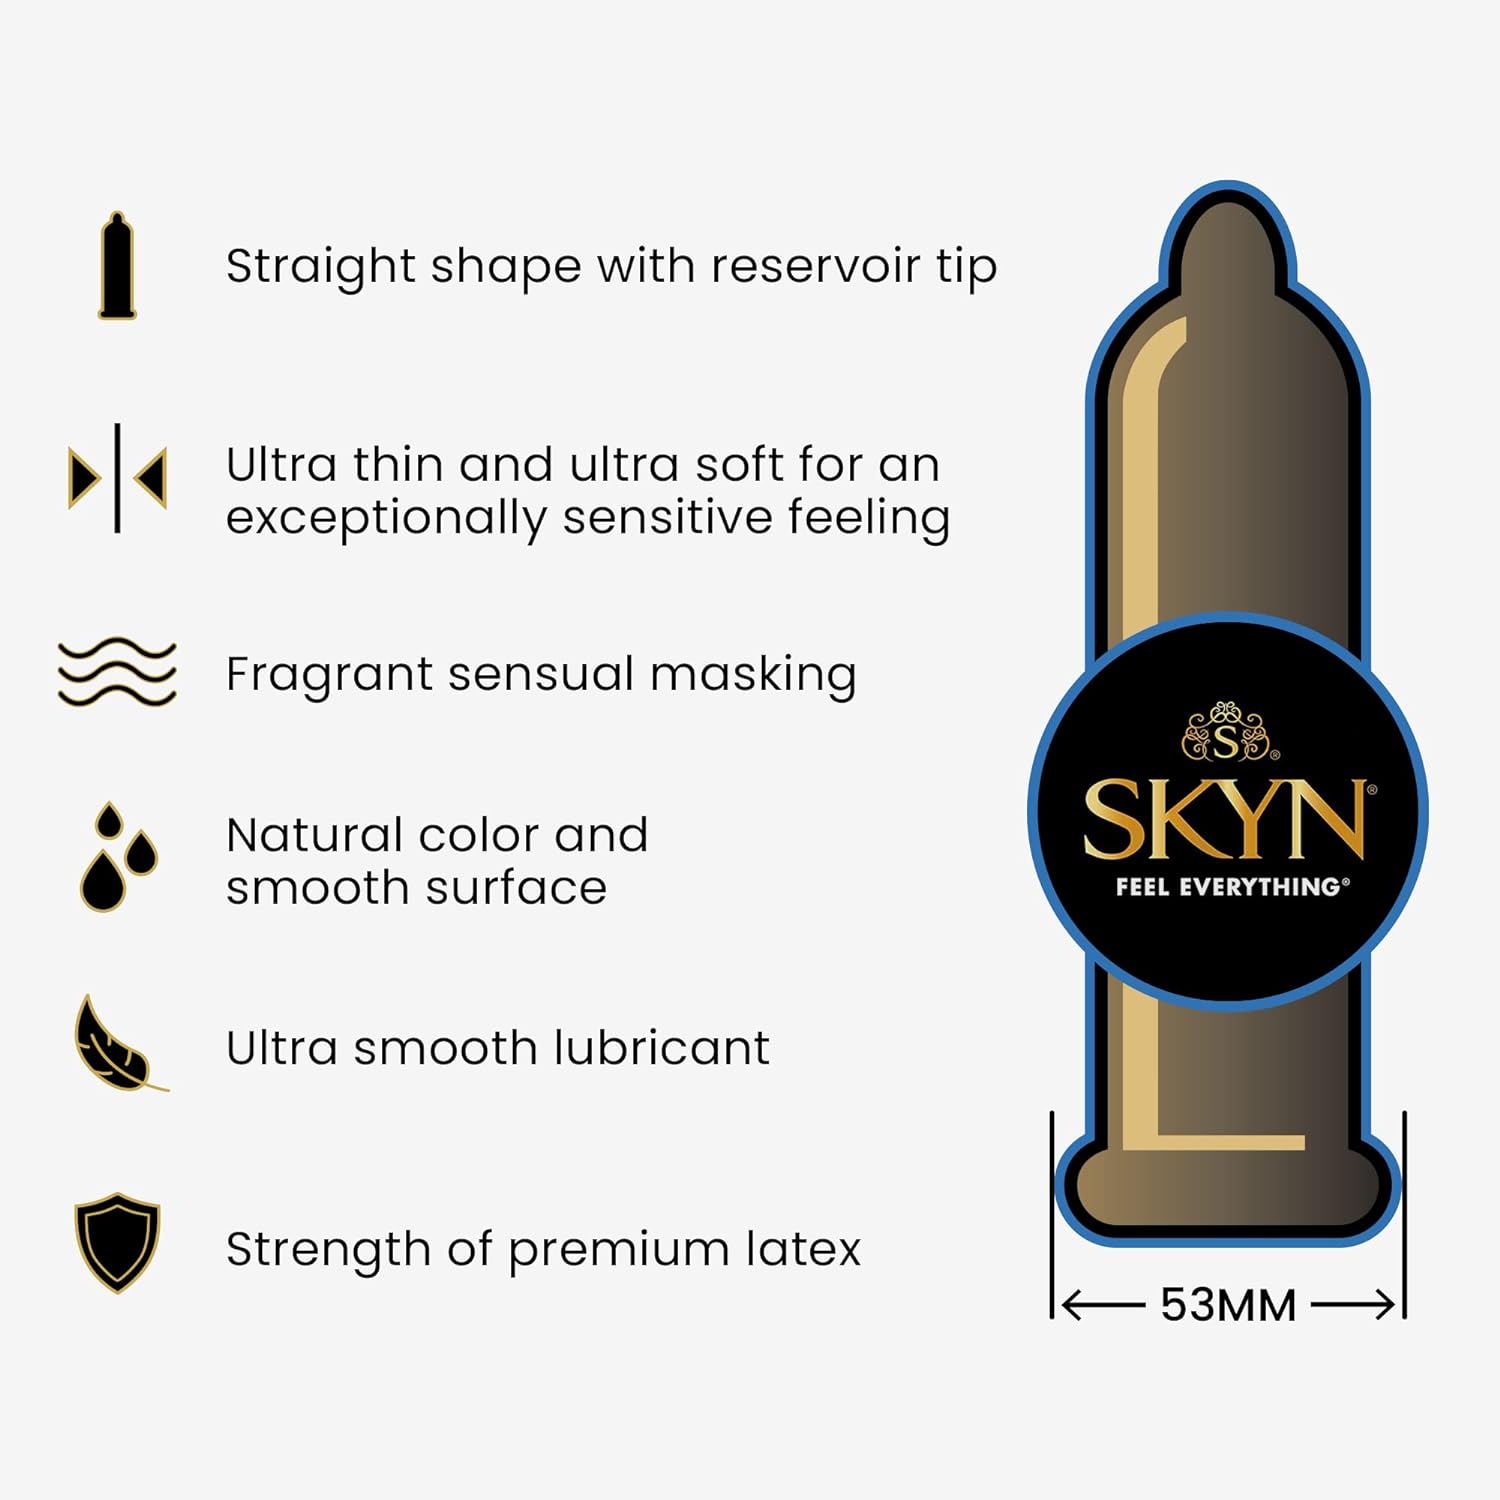 SKYN Elite Extra Lube Condoms Review